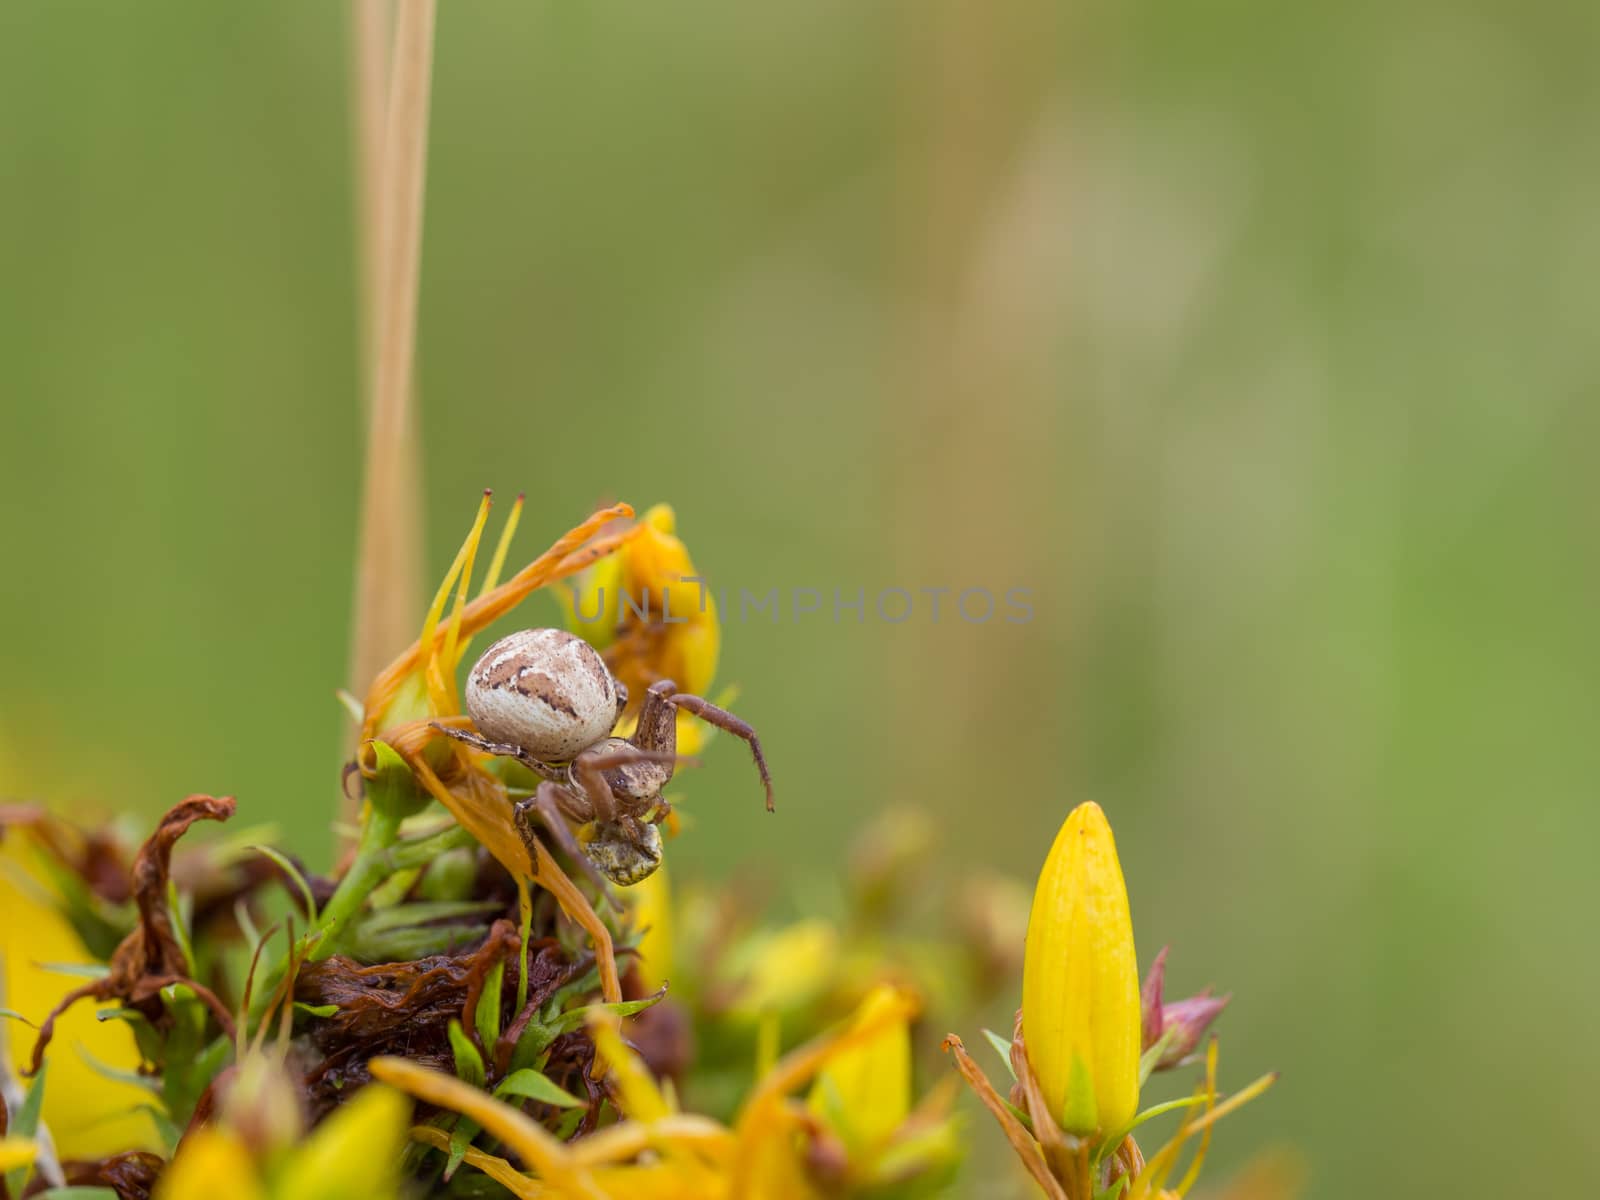 Small cross spider on yellow flowers by frankhoekzema